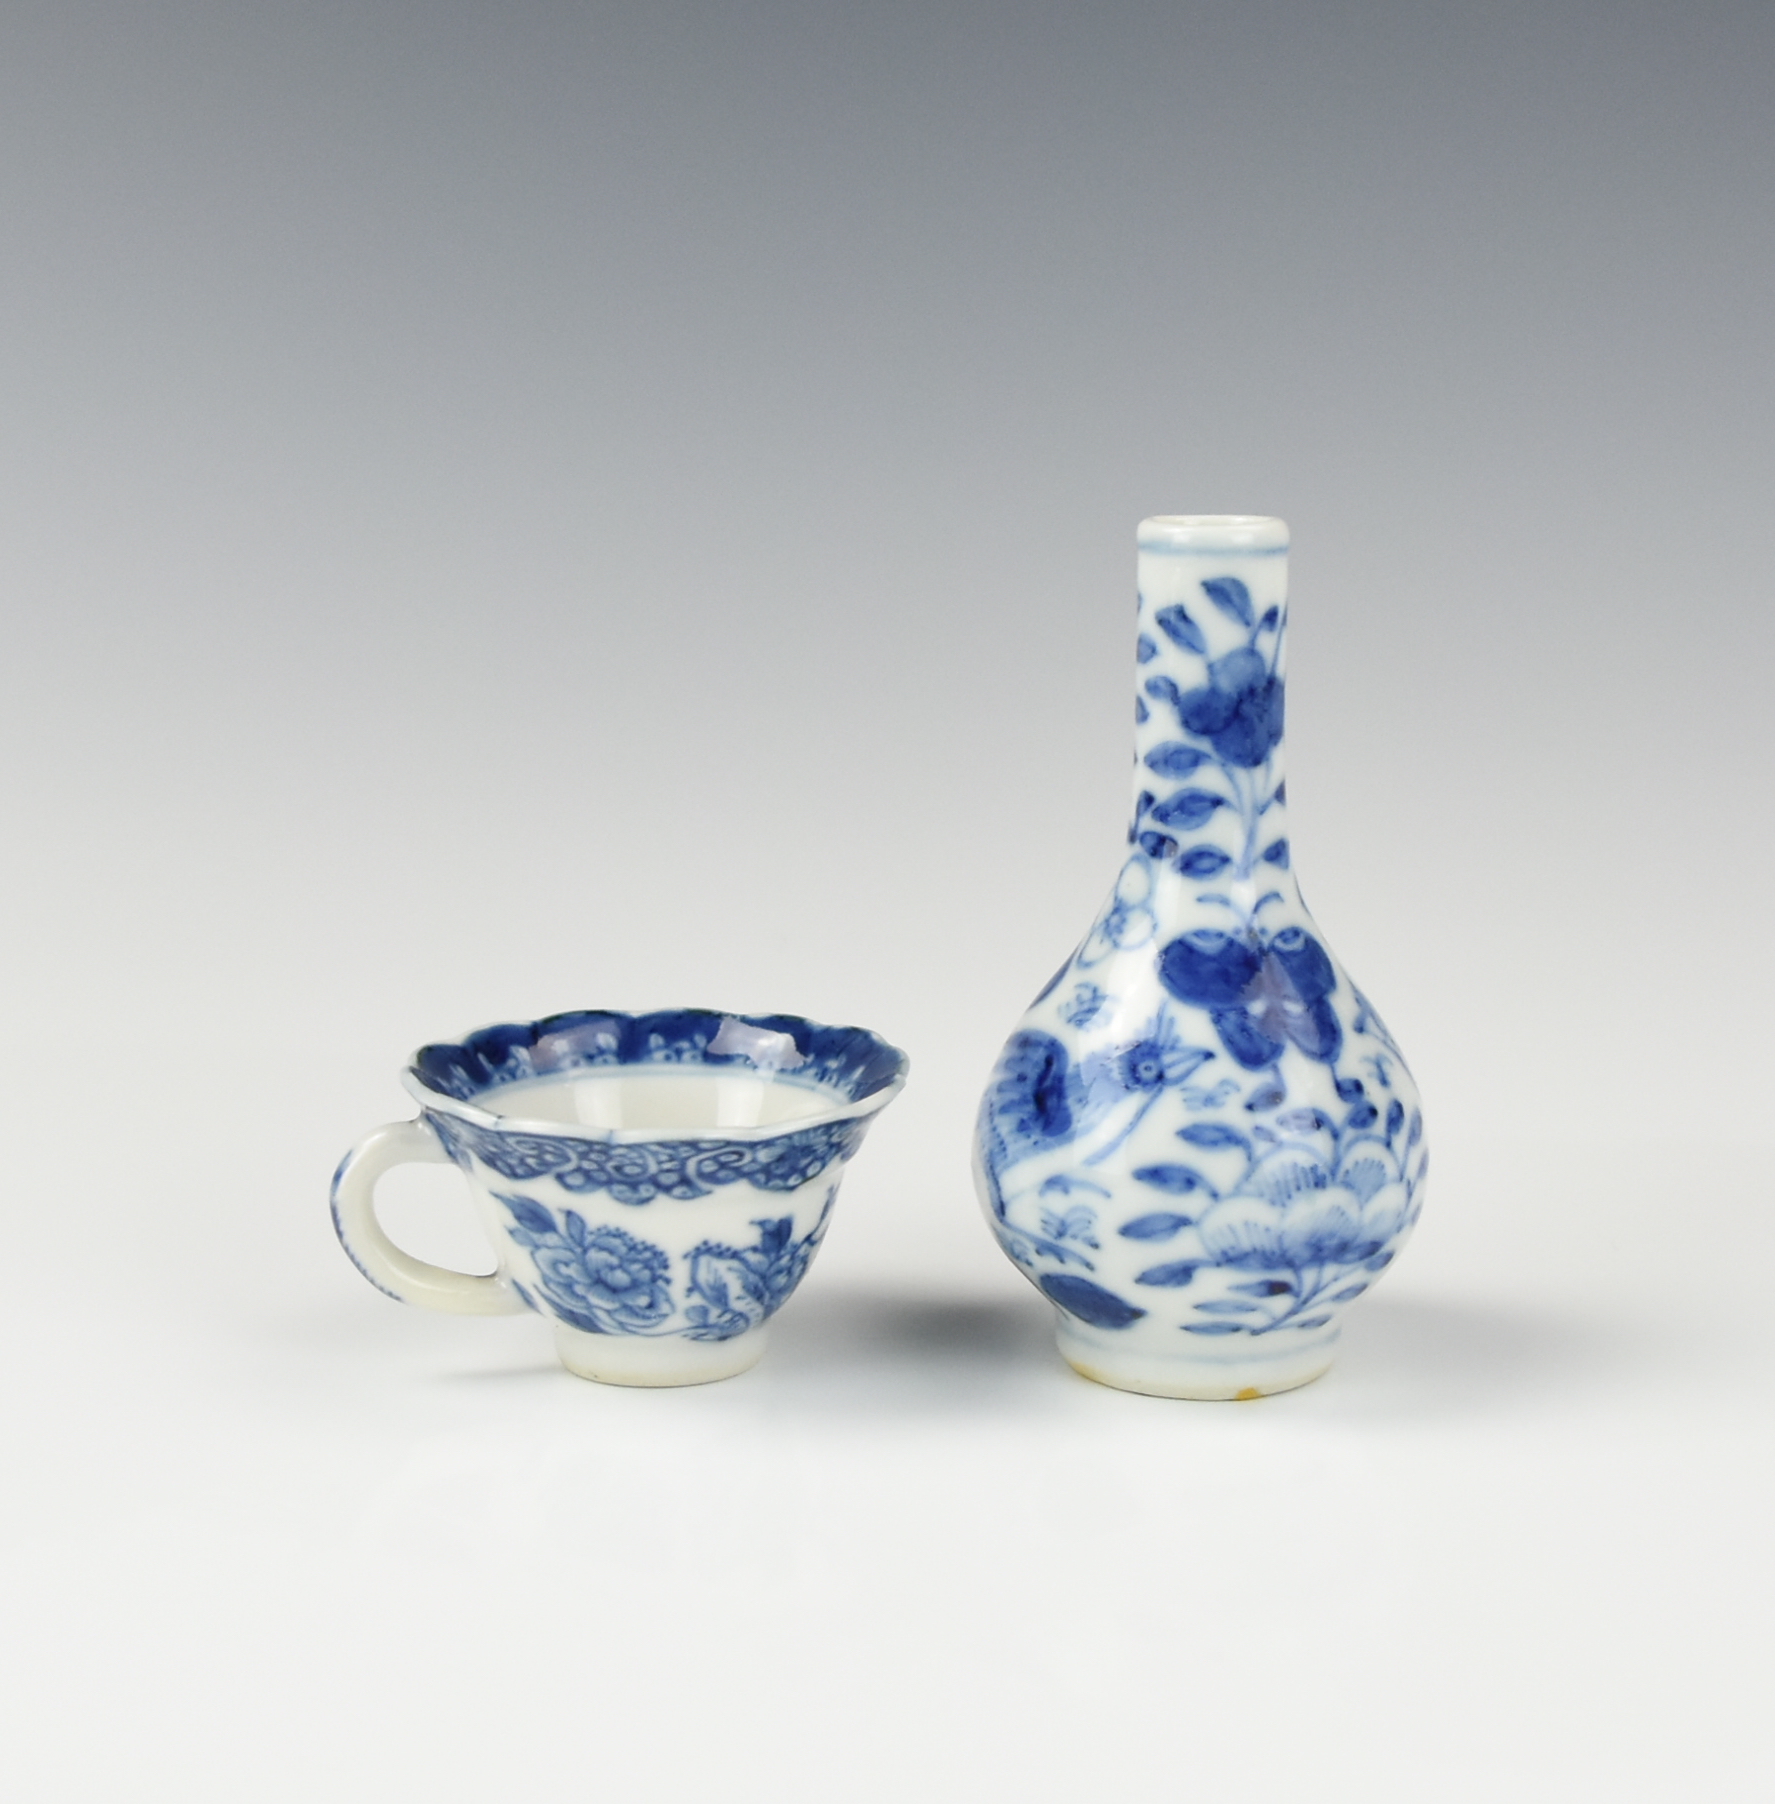 SMALL CHINESE BLUE WHITE VASE 2ceee8